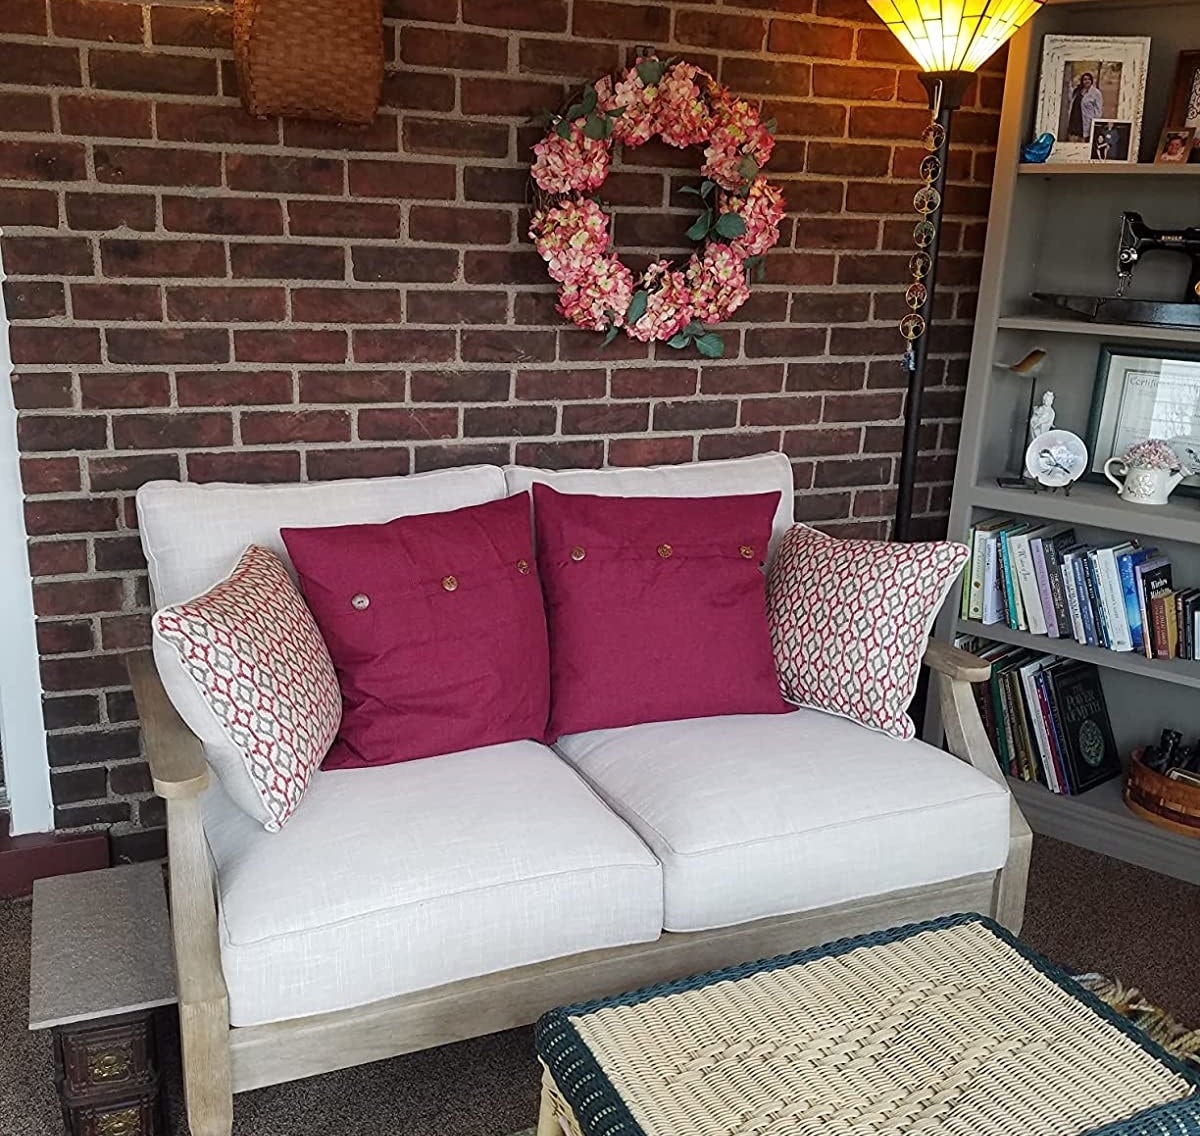 the neutral colored loveseat